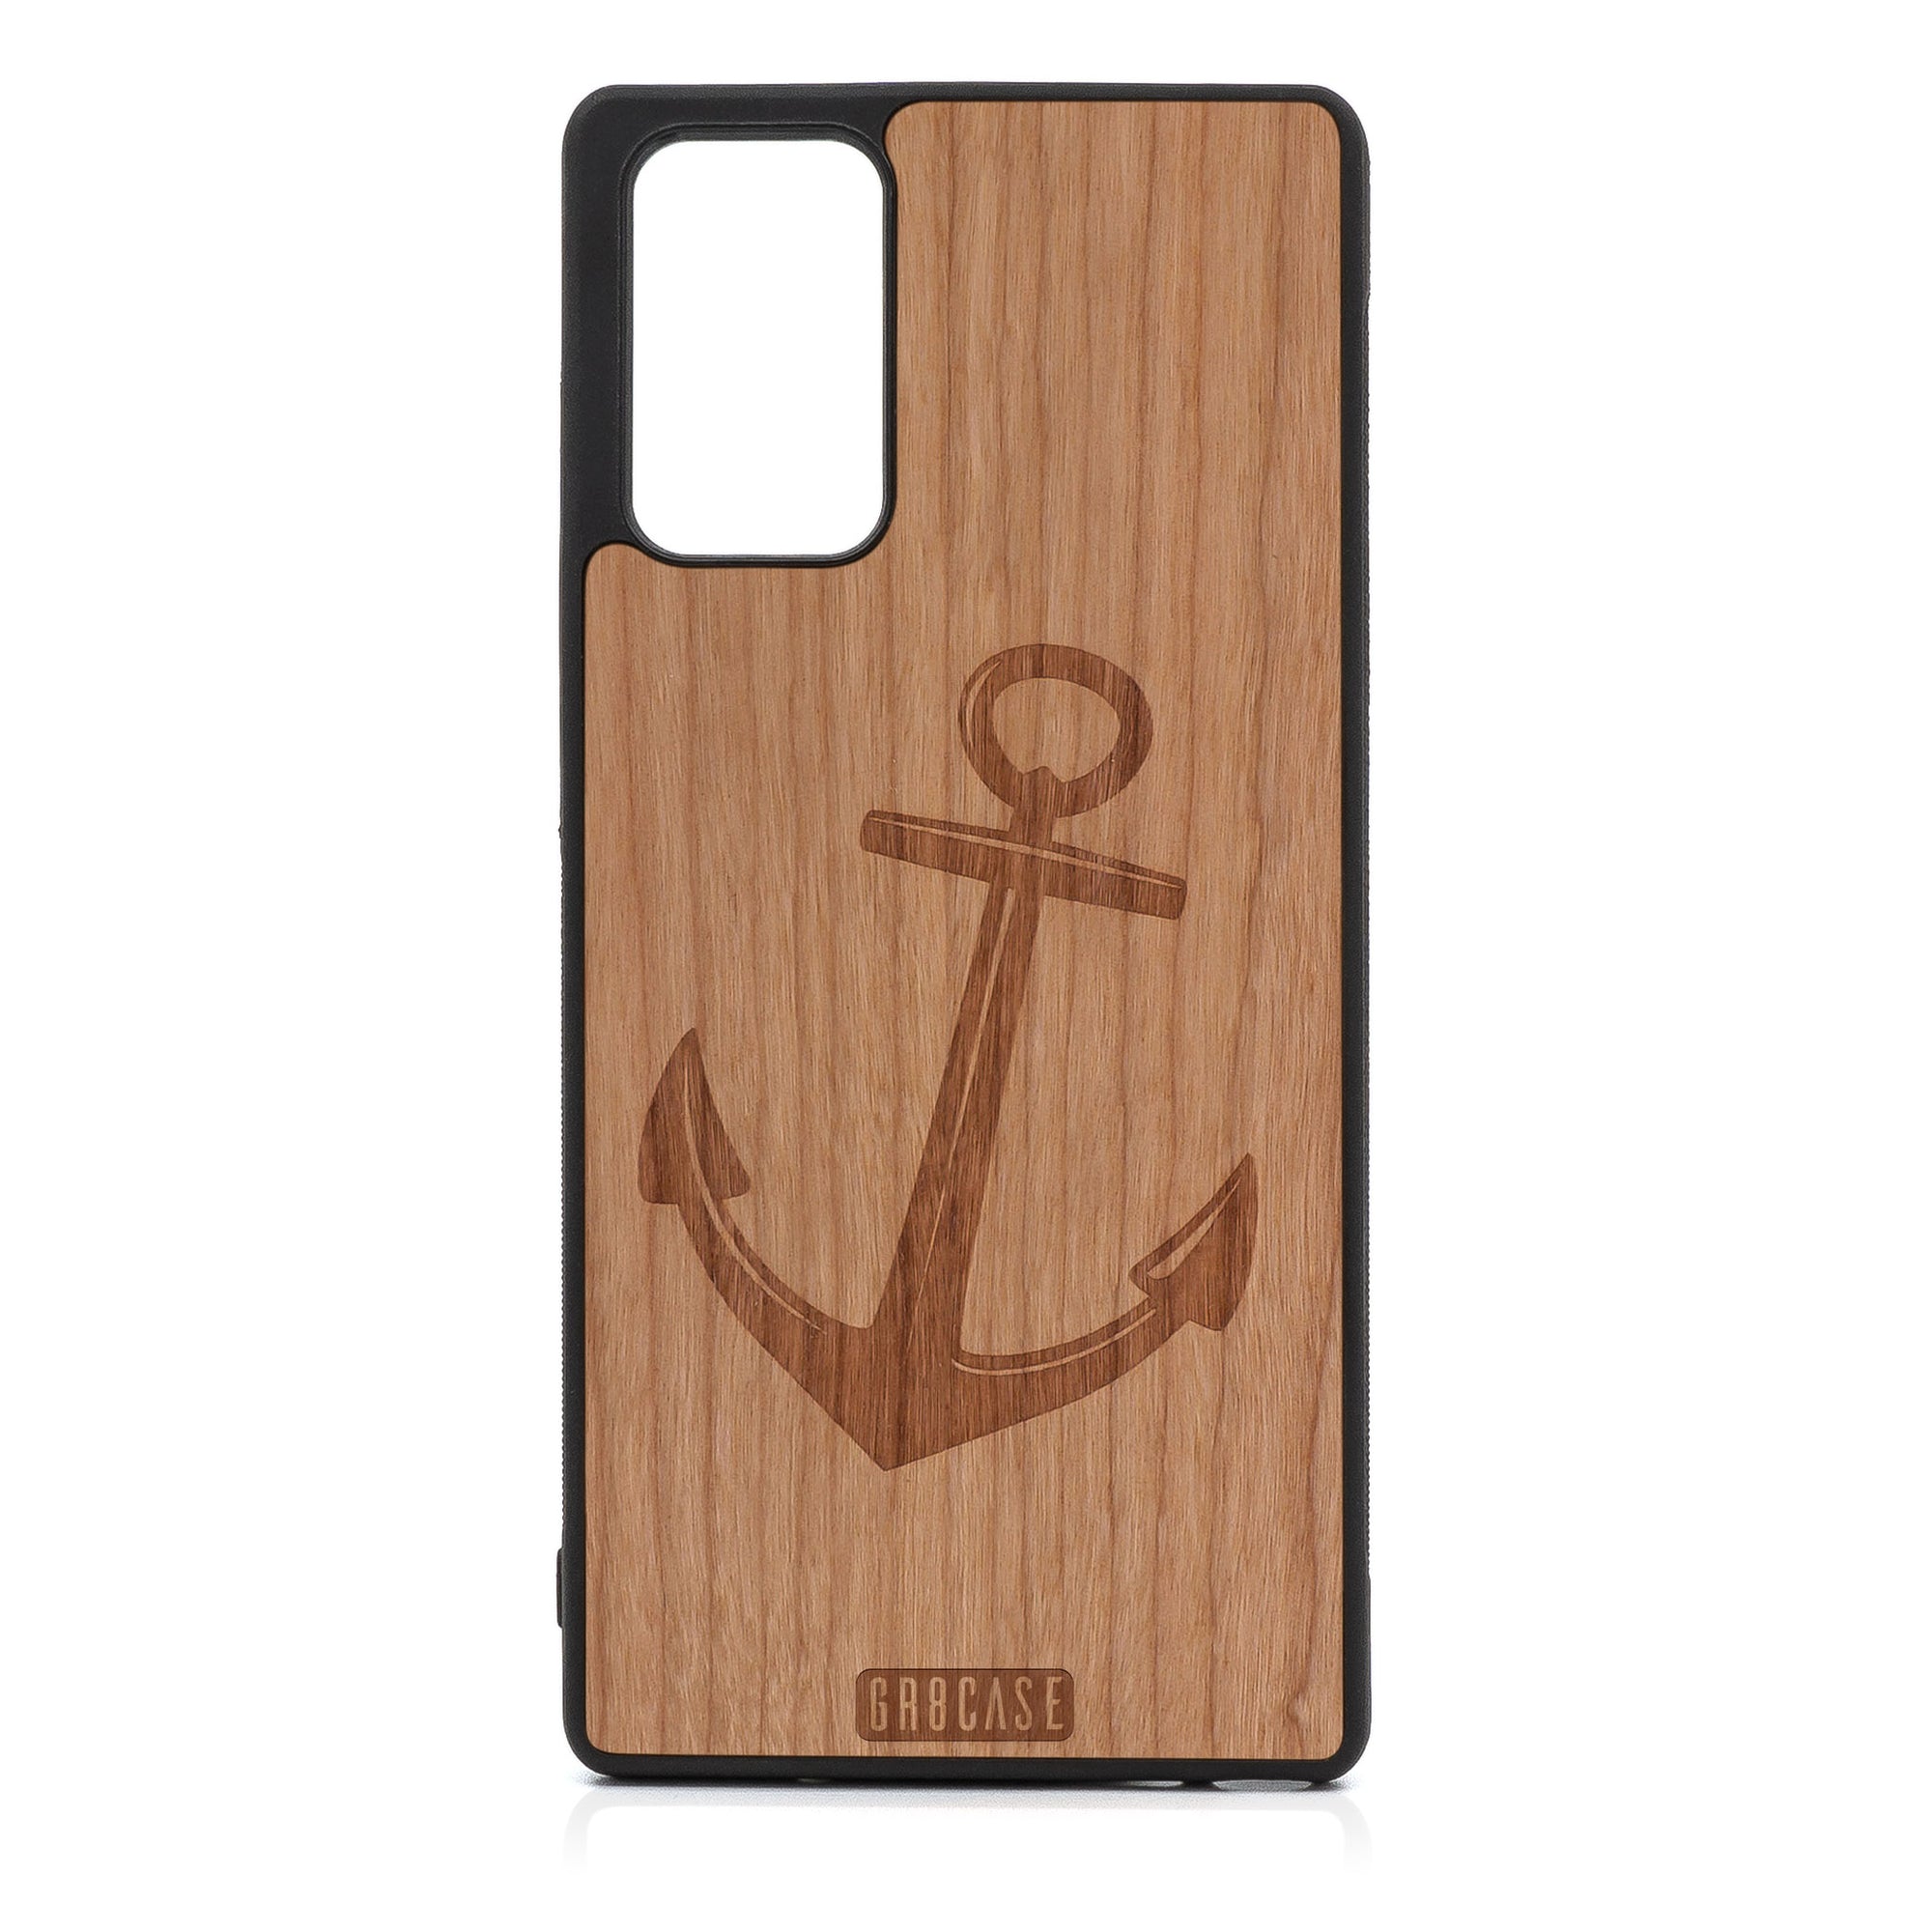 Anchor Design Wood Case For Samsung Galaxy Note 20